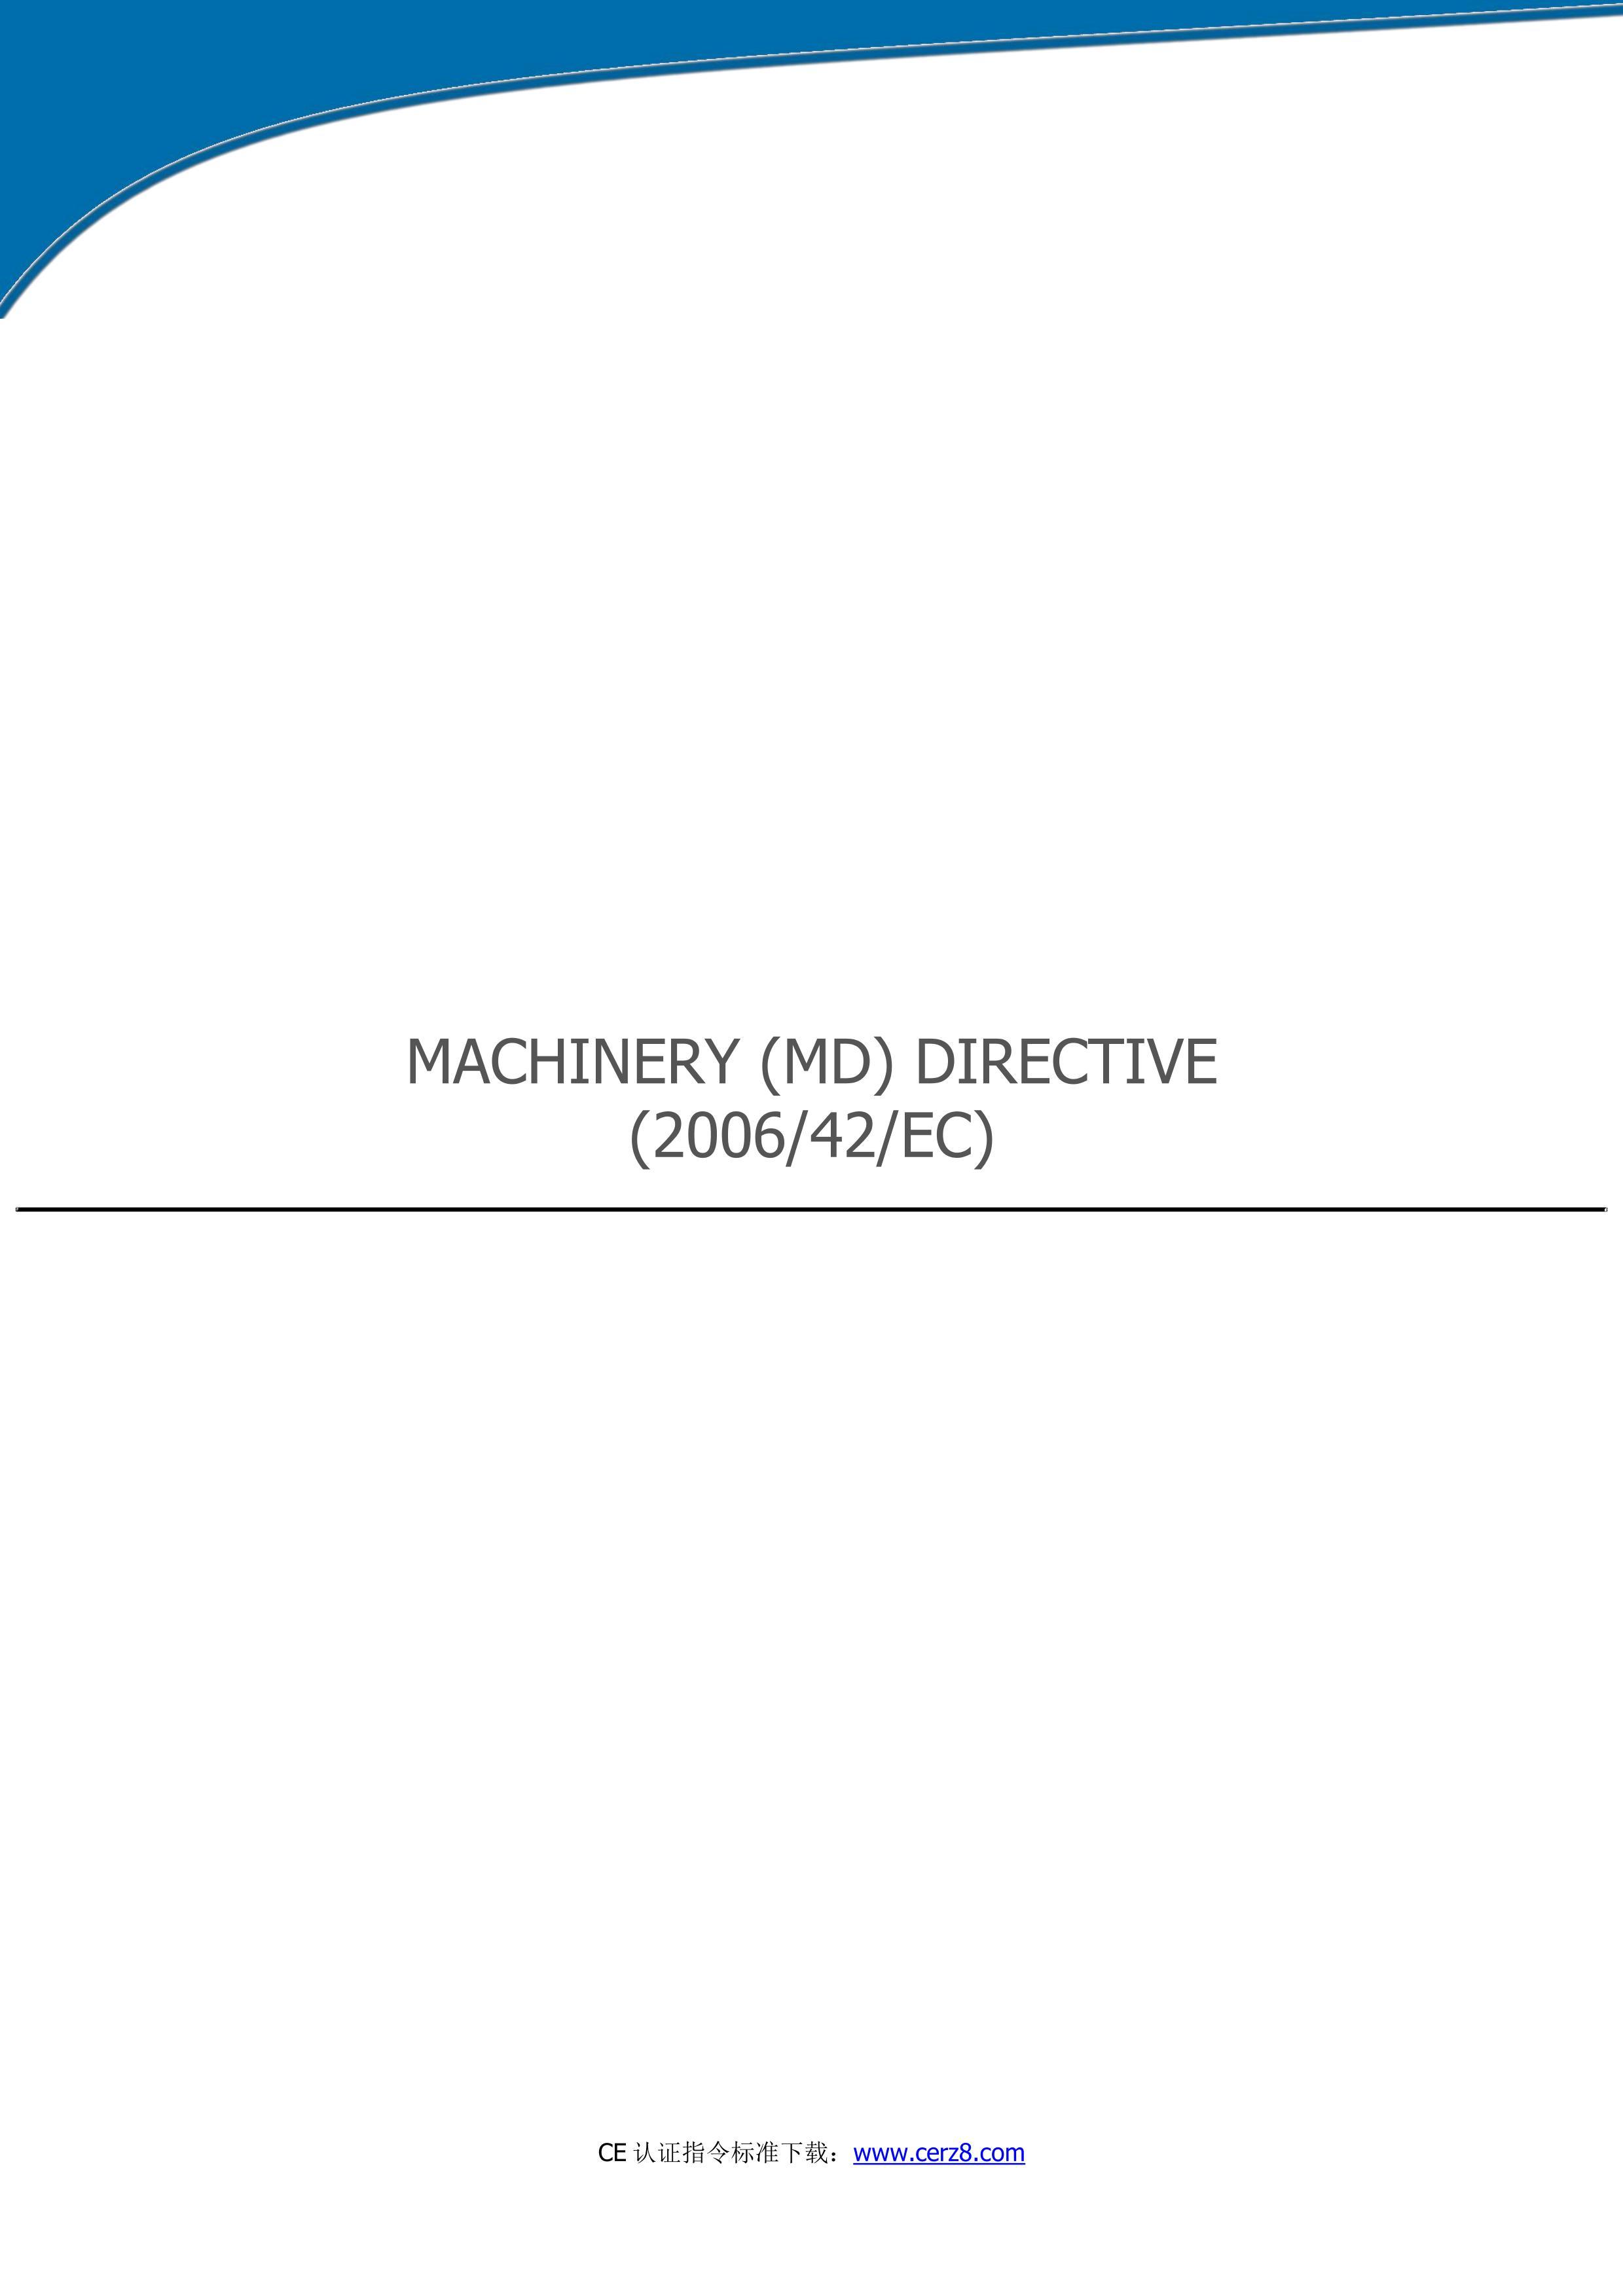 DIRECTIVE 2006M42EC of The EUROPEAN PARLIAMENT and of the COUNCIL of 17 May 2006 on machinery, and amending Directive 95M16MEC (recast).pdf1ҳ